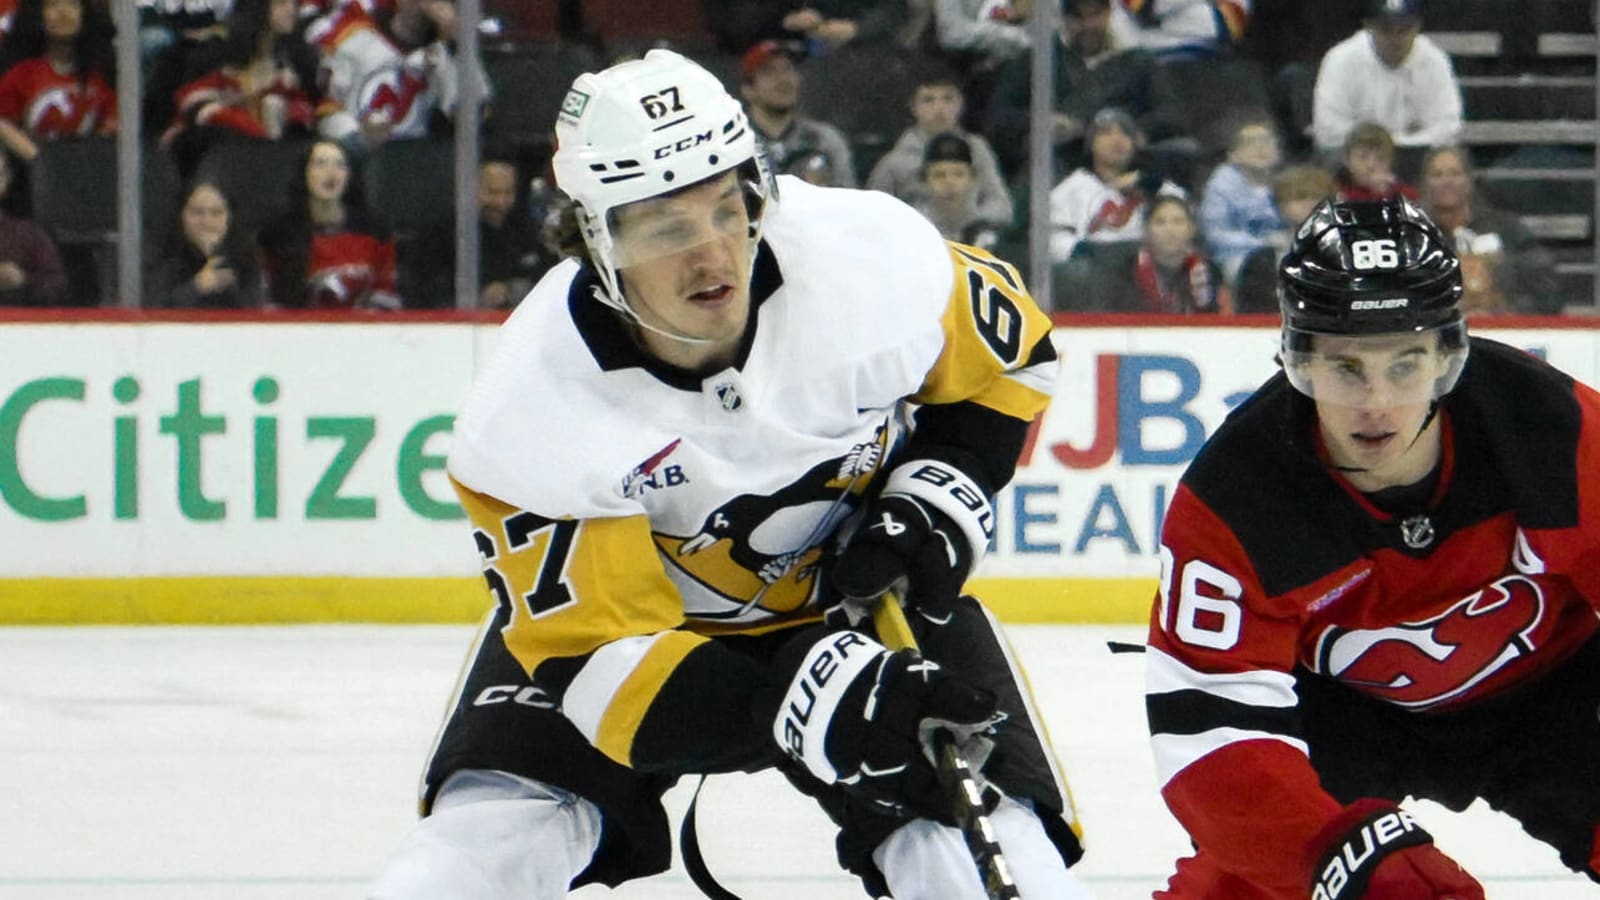 Penguins Room: No Quit, ‘We’re Still in This Fight’